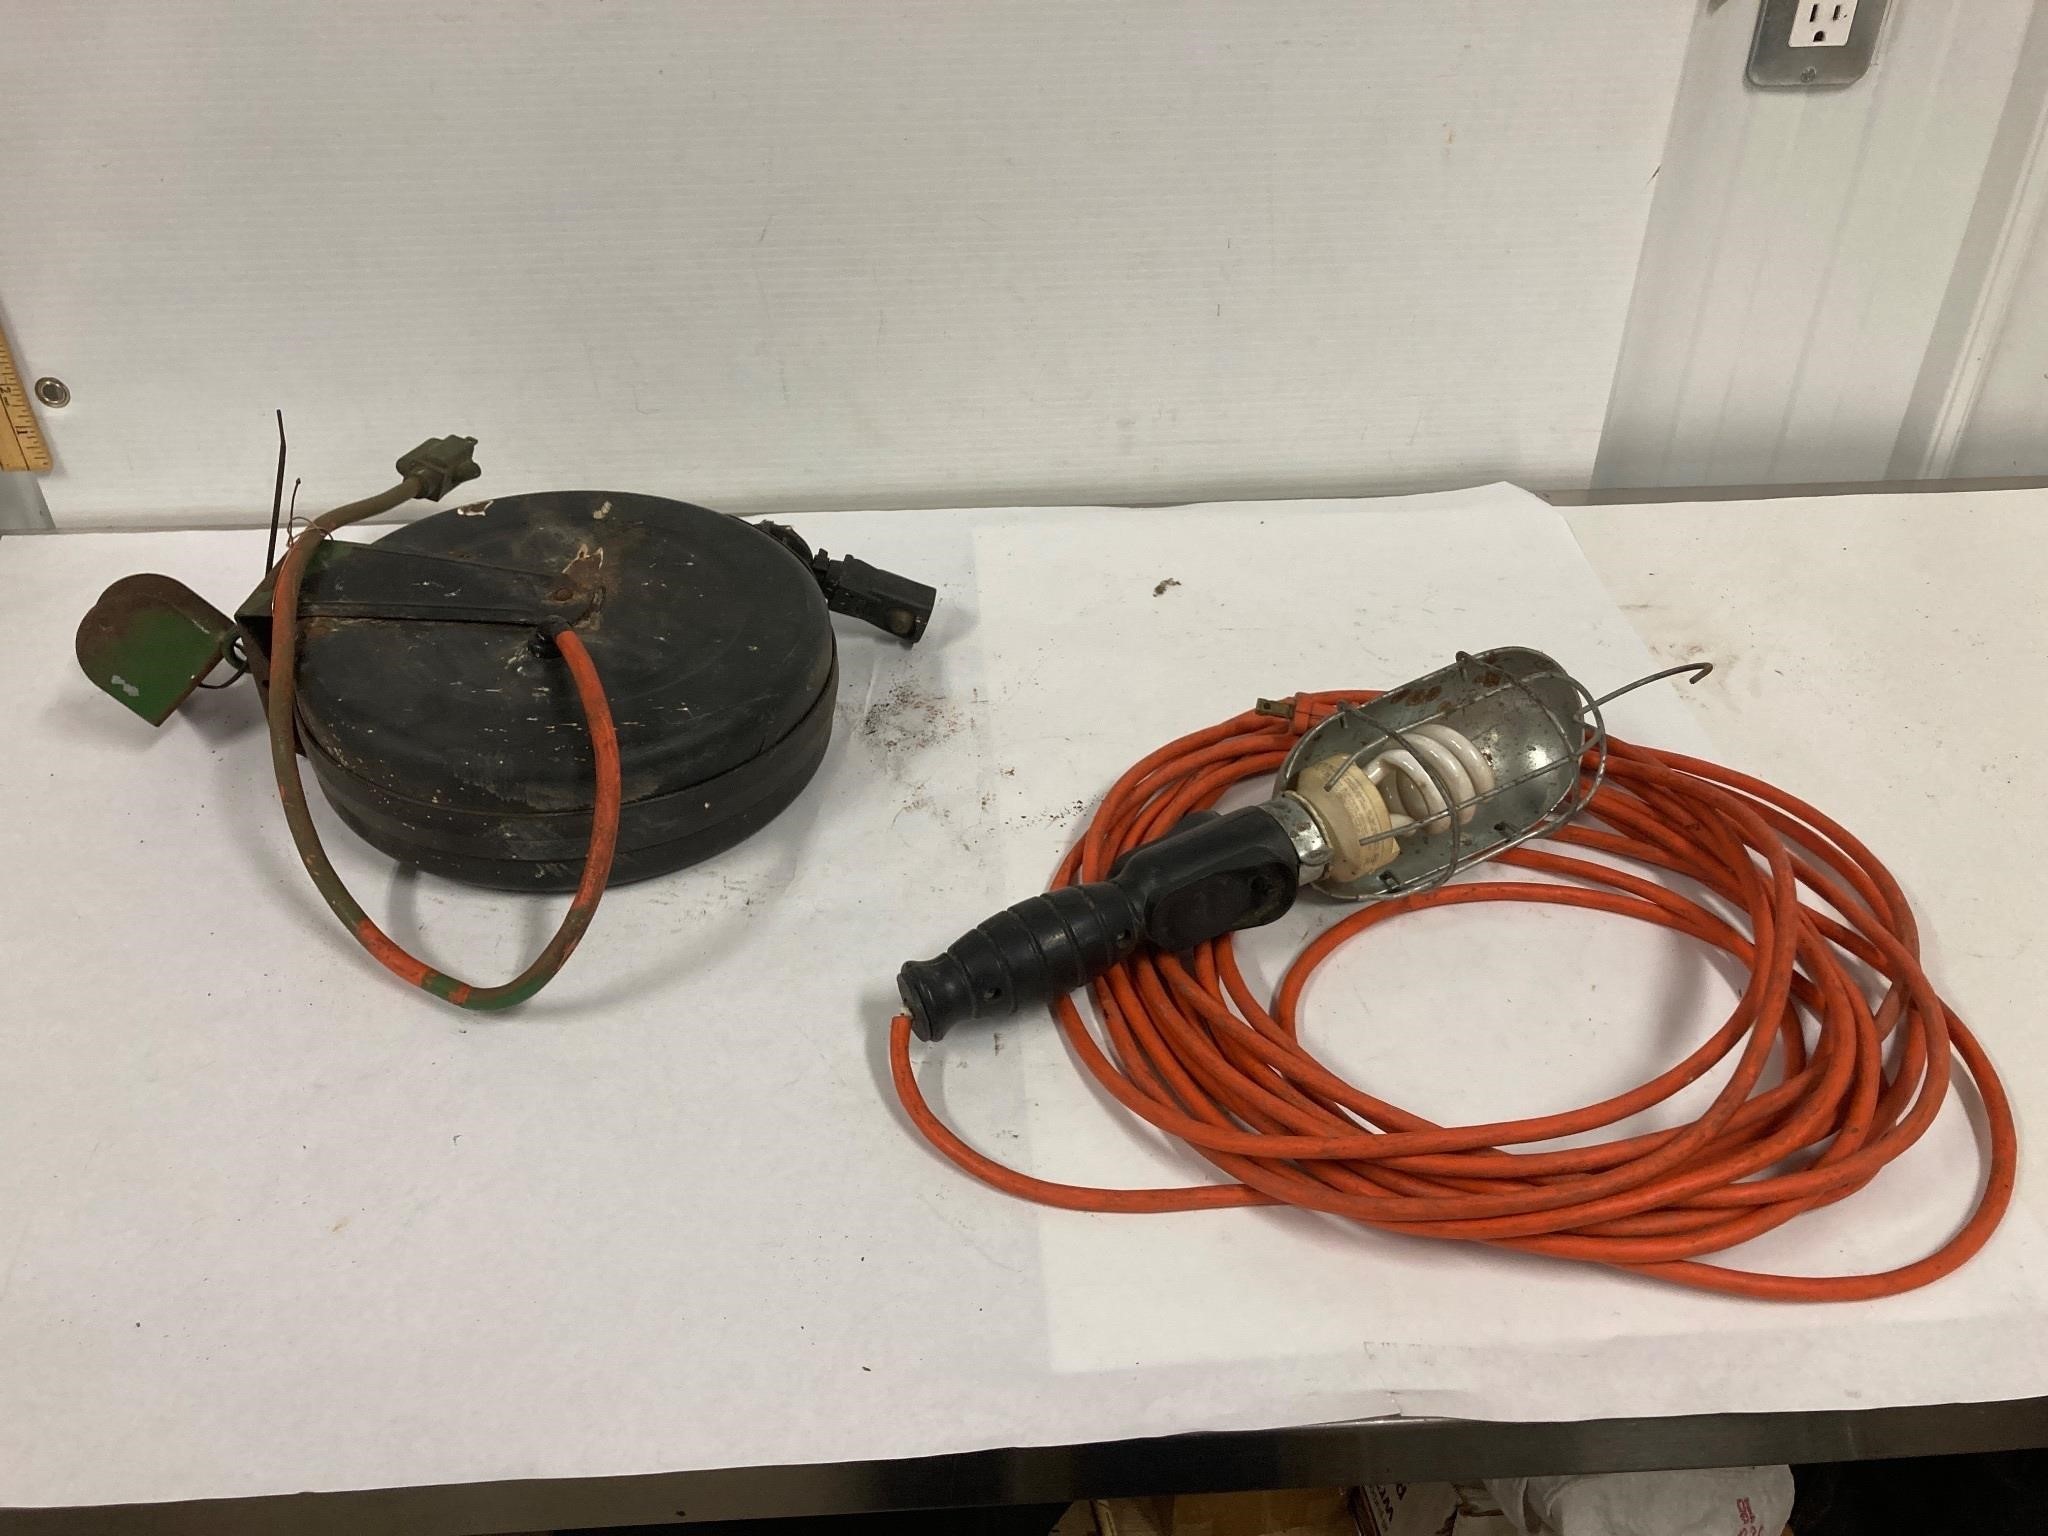 30 ft retractable ext cord , trouble light. Works